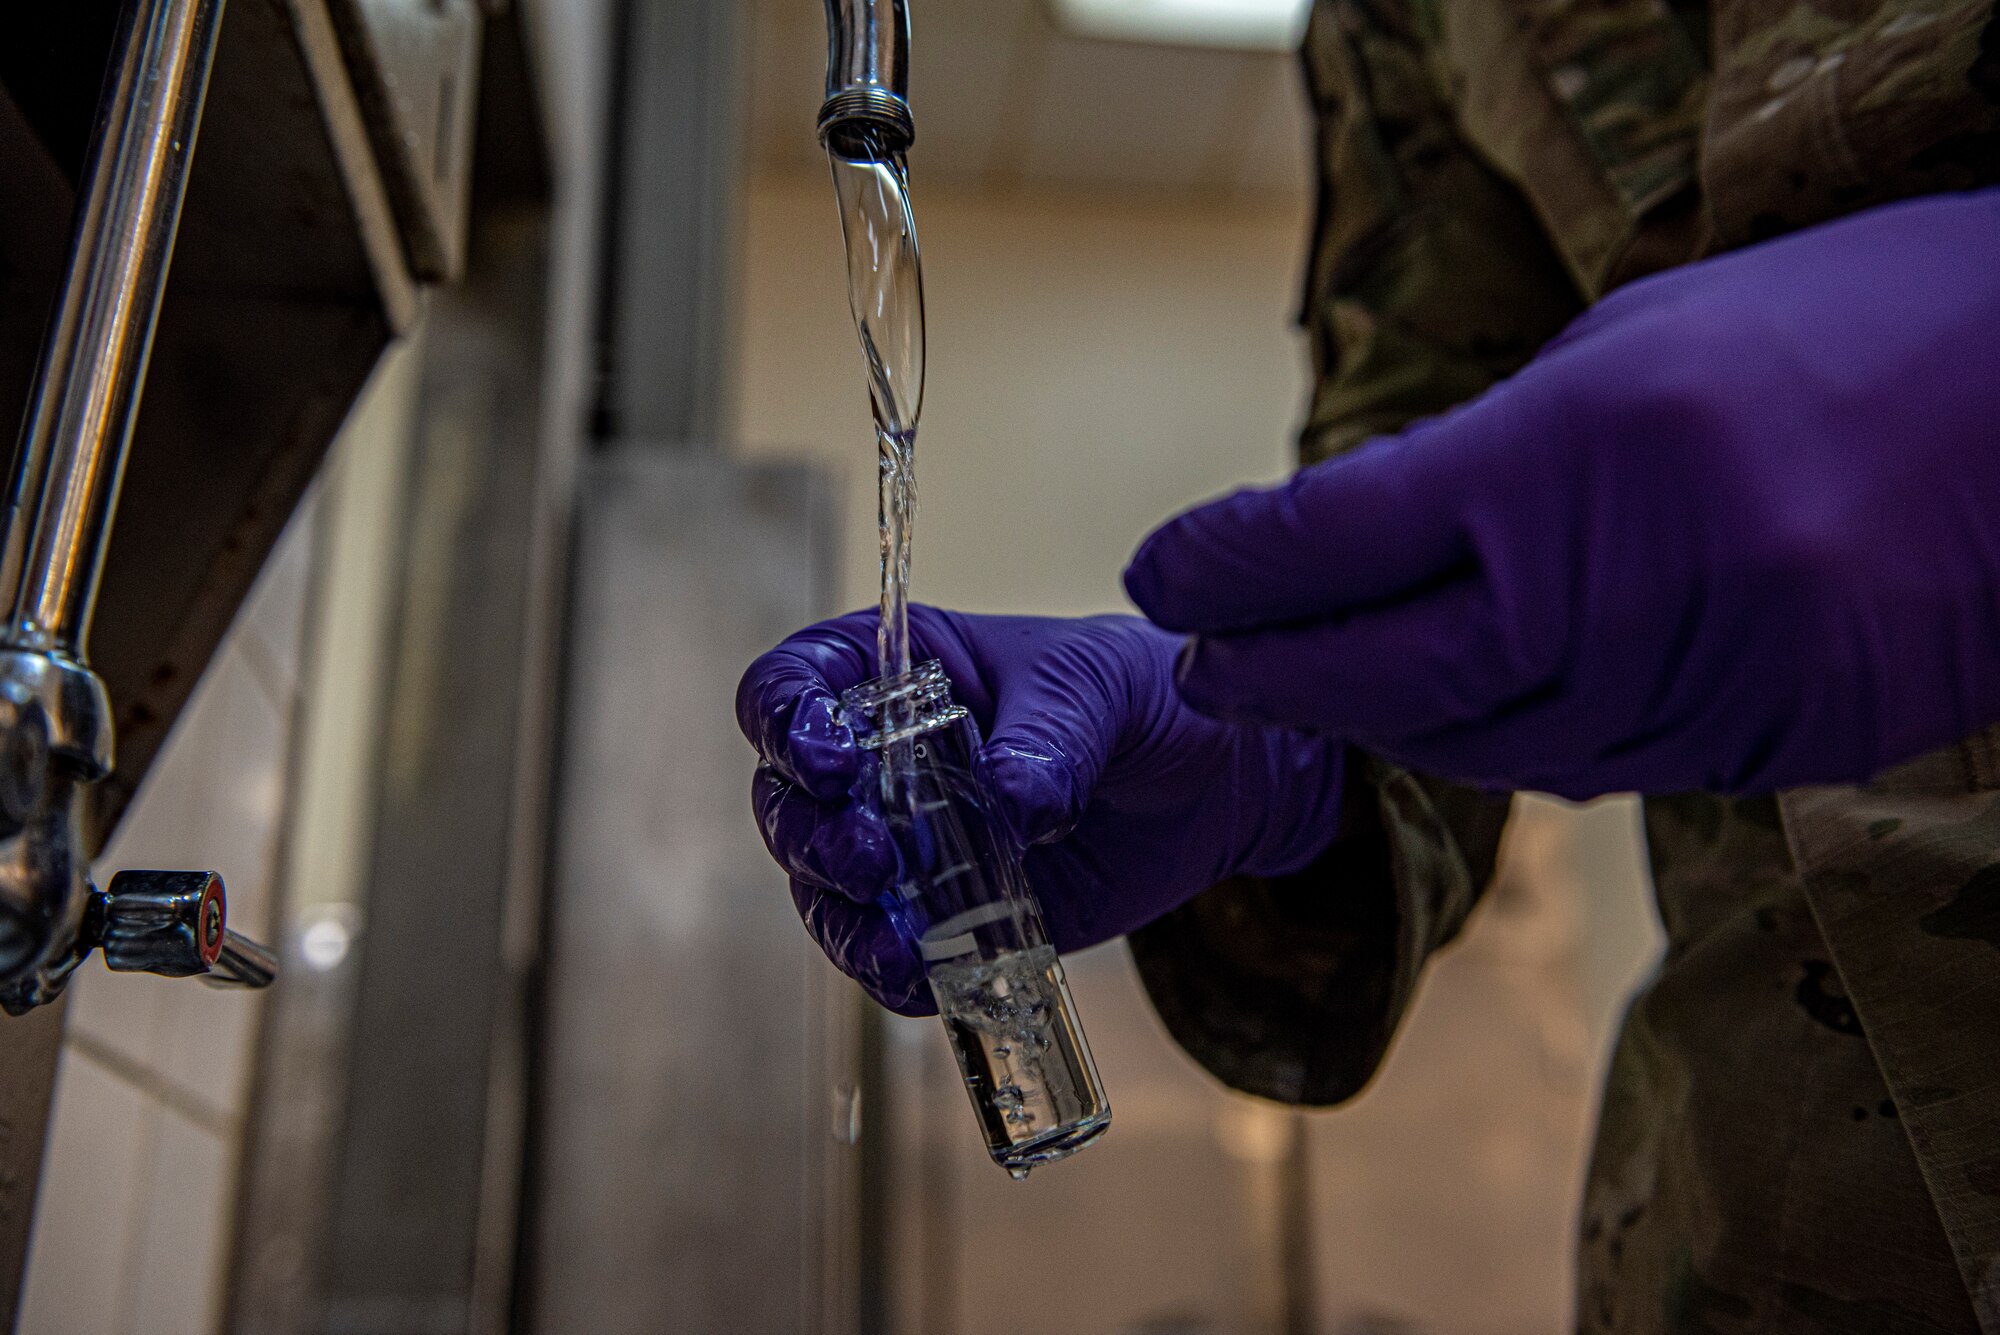 Senior Airman Matthew Ketterling, 379th Expeditionary Medical Operations Squadron bioenvironmental engineering journeyman, collects water samples at the Blachford-Preston Complex dining facility June 16, 2021, at Al Udeid Air Base, Qatar.